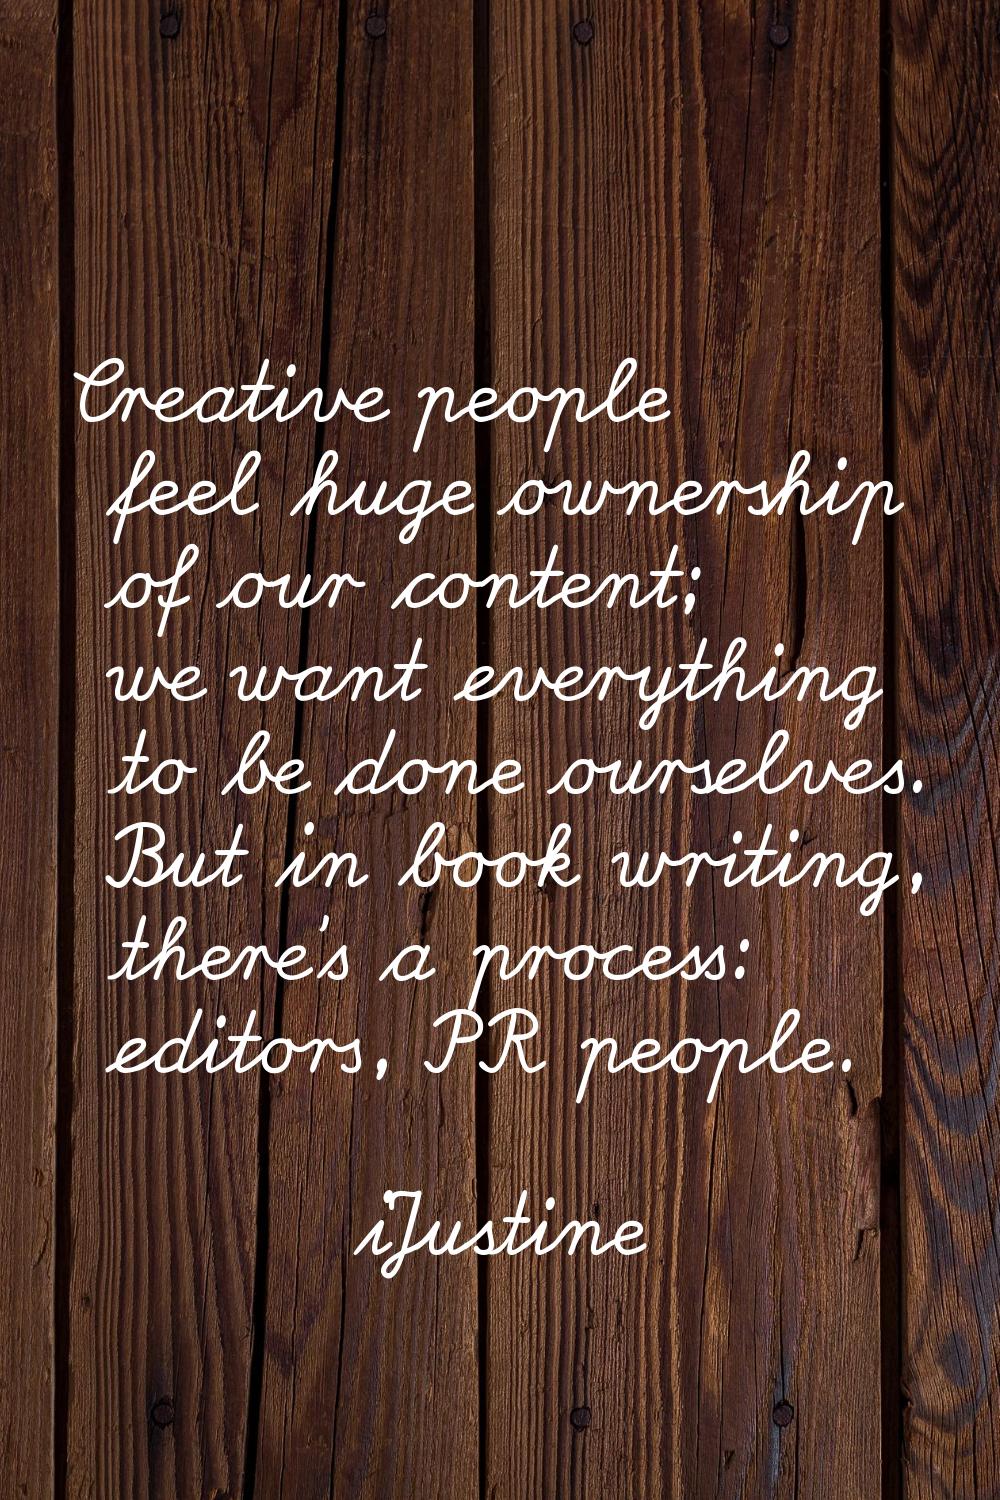 Creative people feel huge ownership of our content; we want everything to be done ourselves. But in